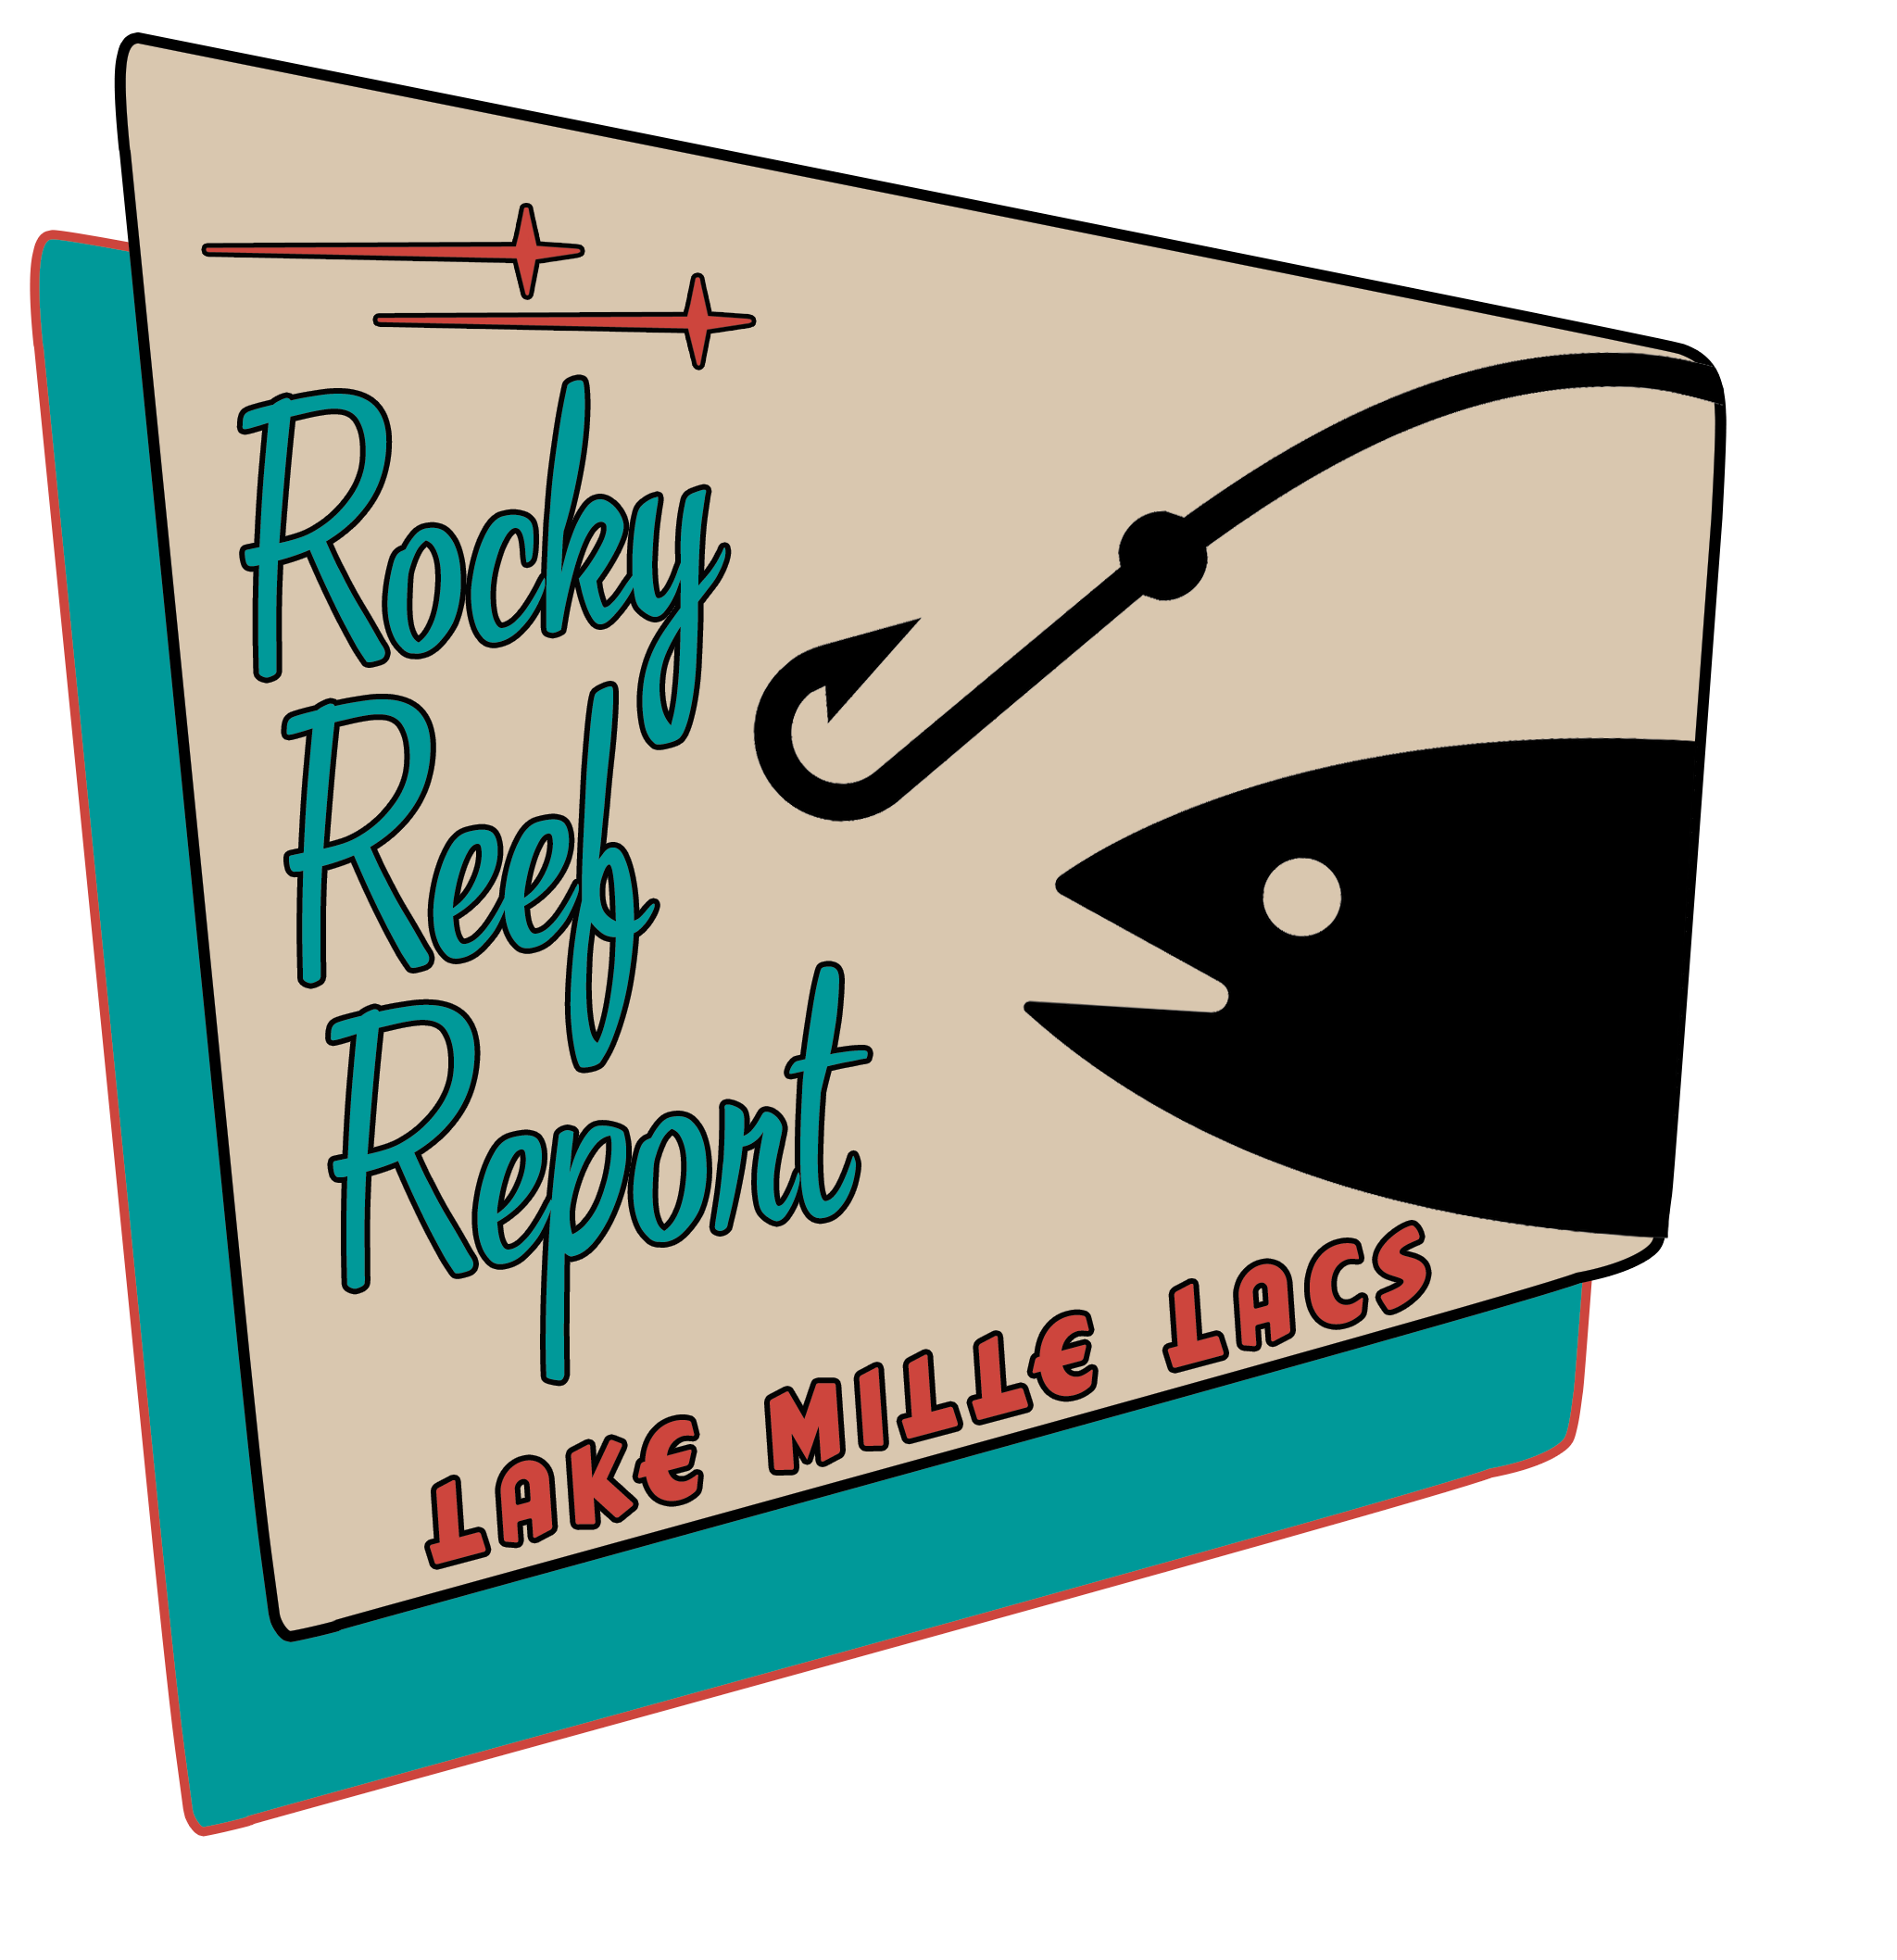 The Rocky Reef Resort Rockreport Weather Conditions and Fishing Report for Lake Mille Lacs